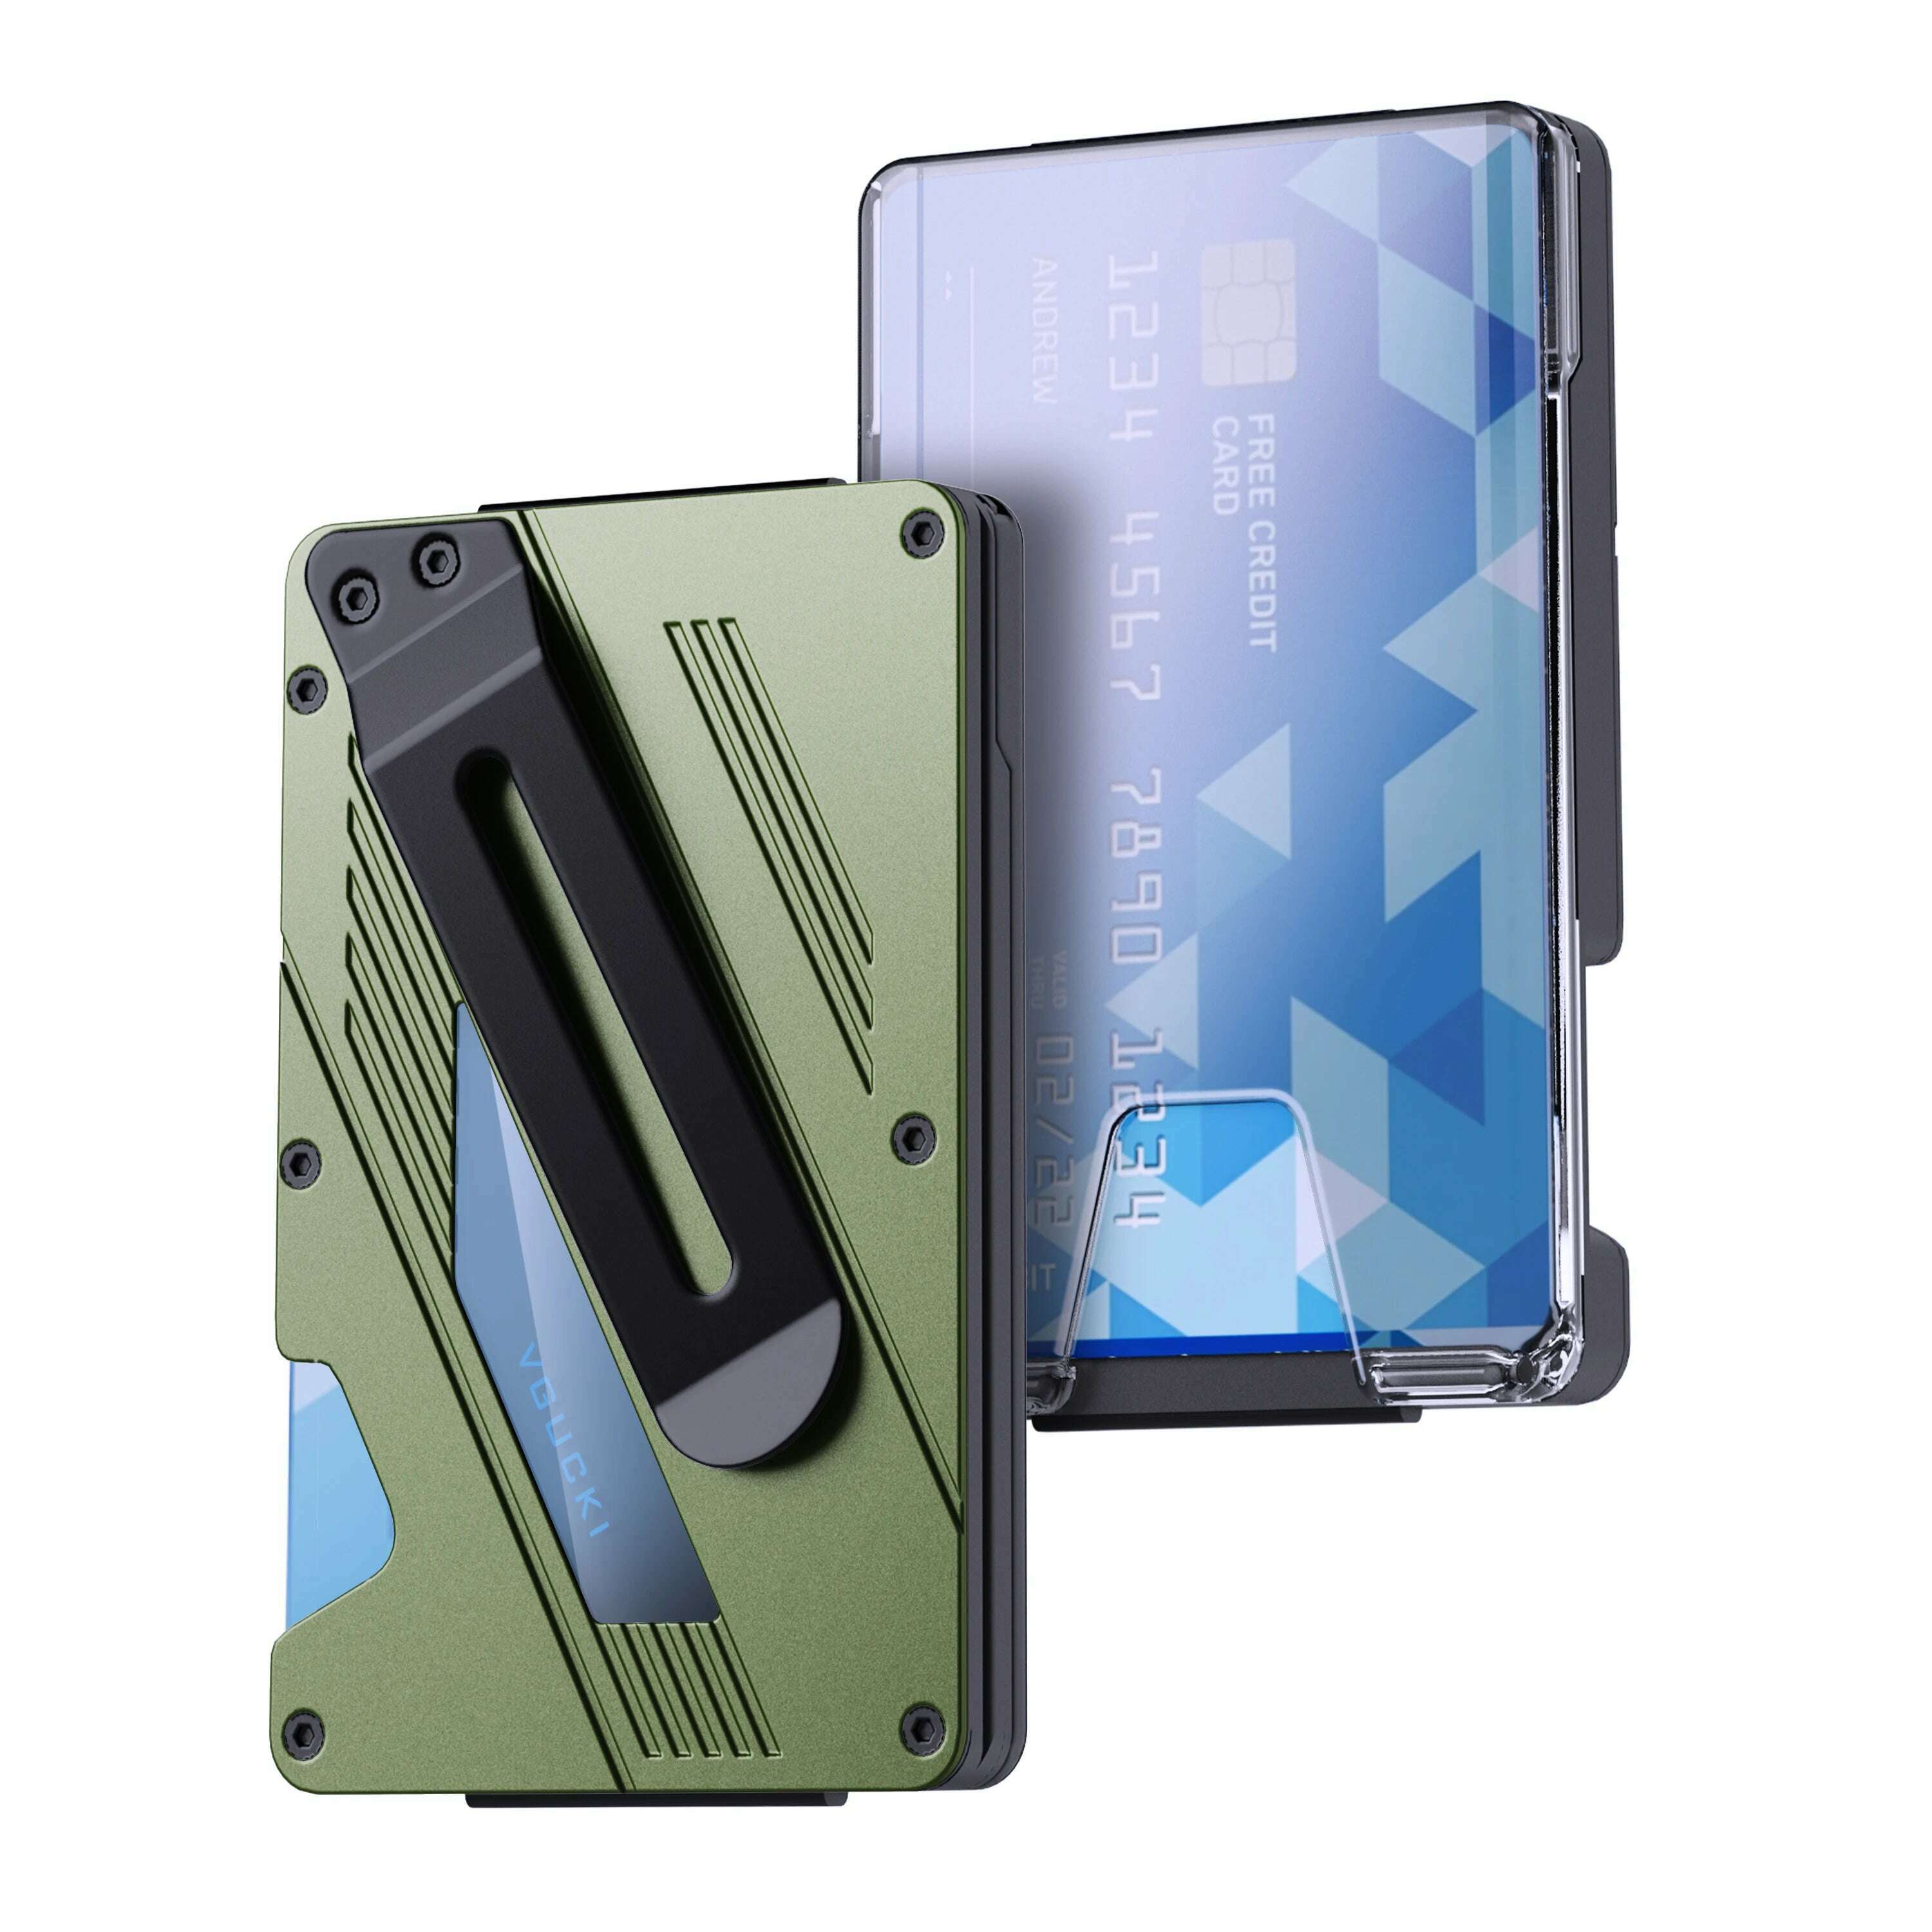 KIMLUD, Wallet for Men- Slim Aluminum Metal Money Clip Wallet with Clear ID Card Holder,  RFID Blocking,Ultra-Thin Tactical Wallet, army green, KIMLUD Womens Clothes